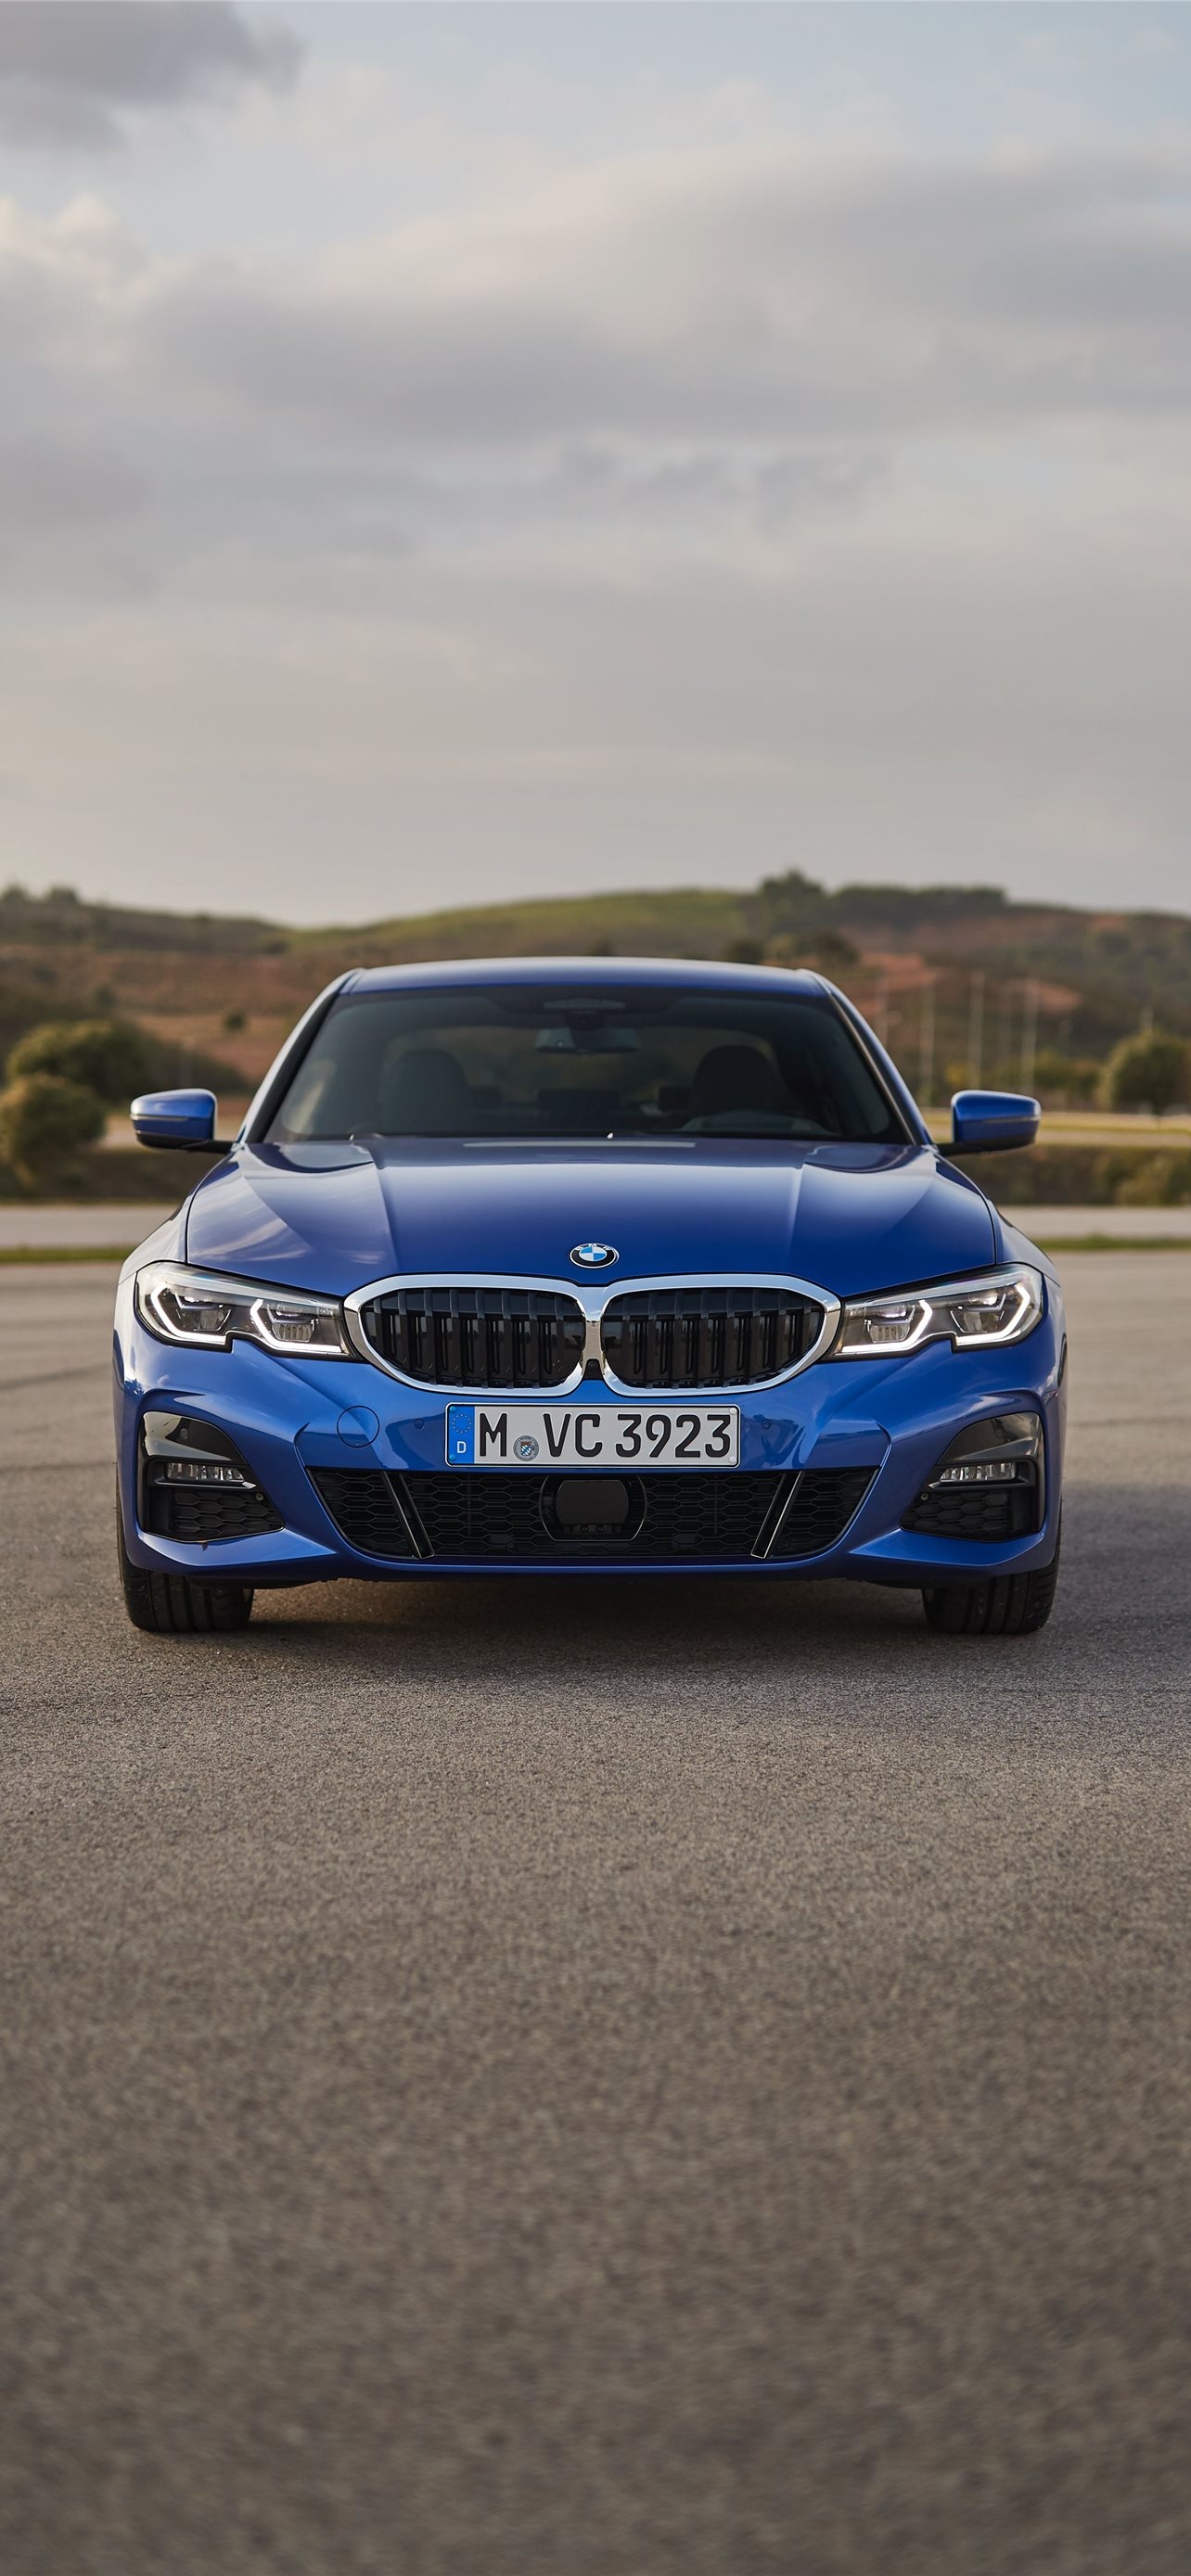 BMW 3 Series, Best wallpapers, High-quality images, Perfect for BMW admirers, 1290x2780 HD Phone